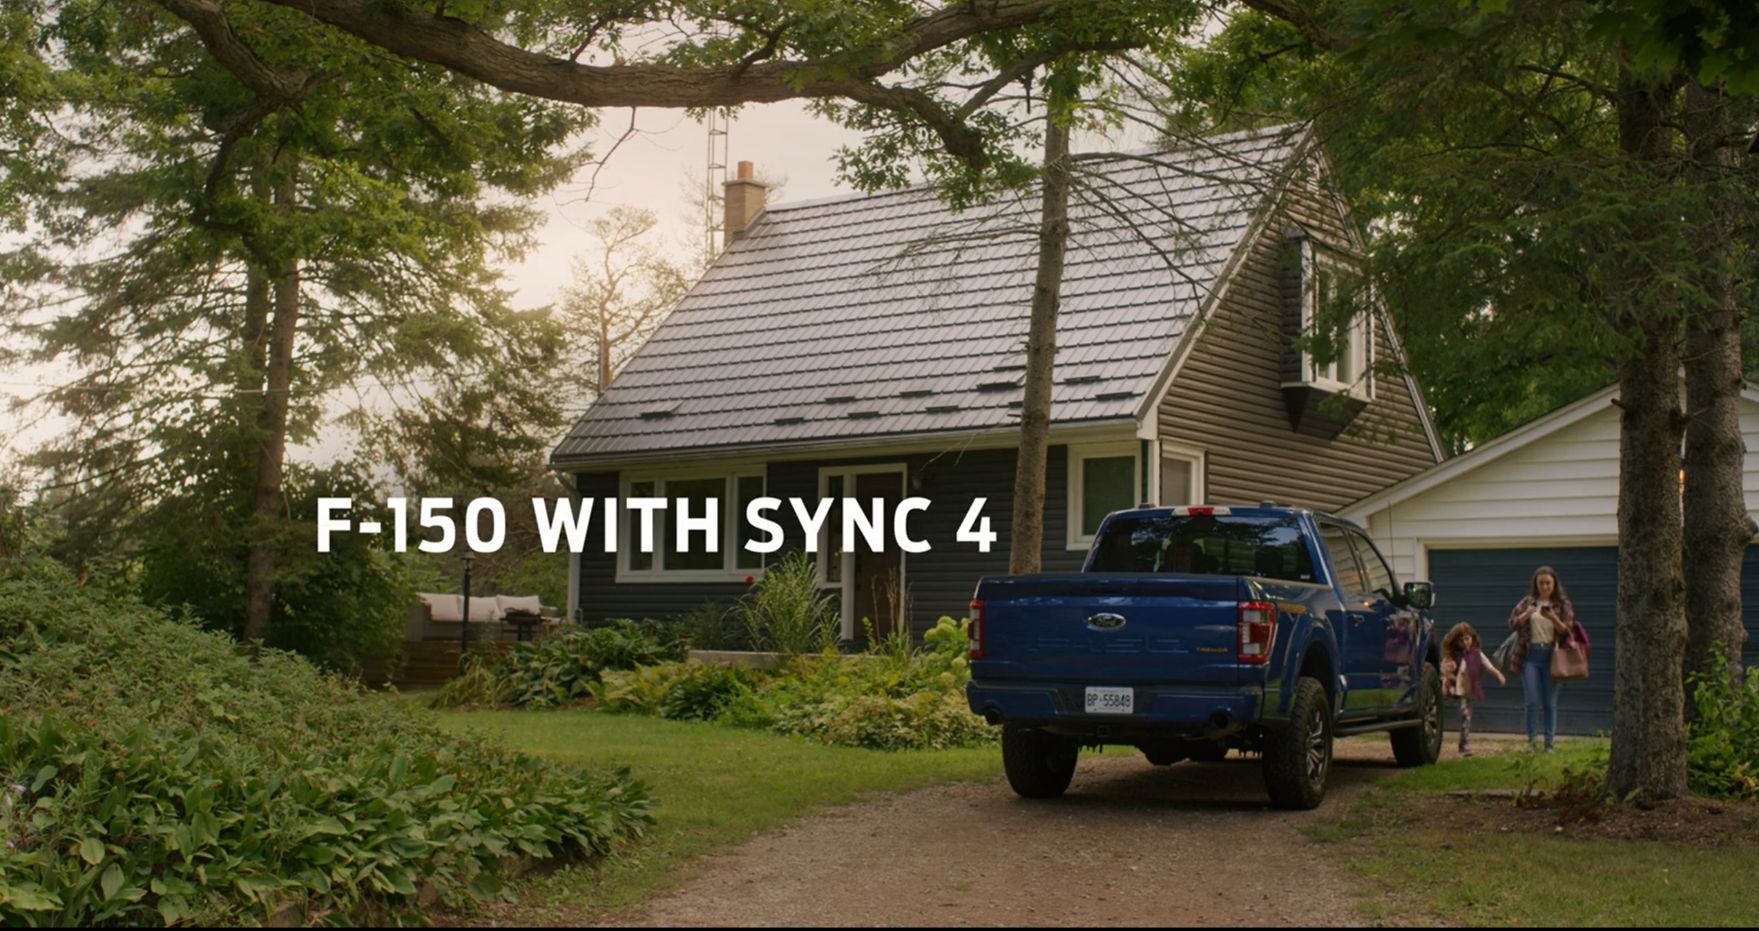 F-150 with Sync 4